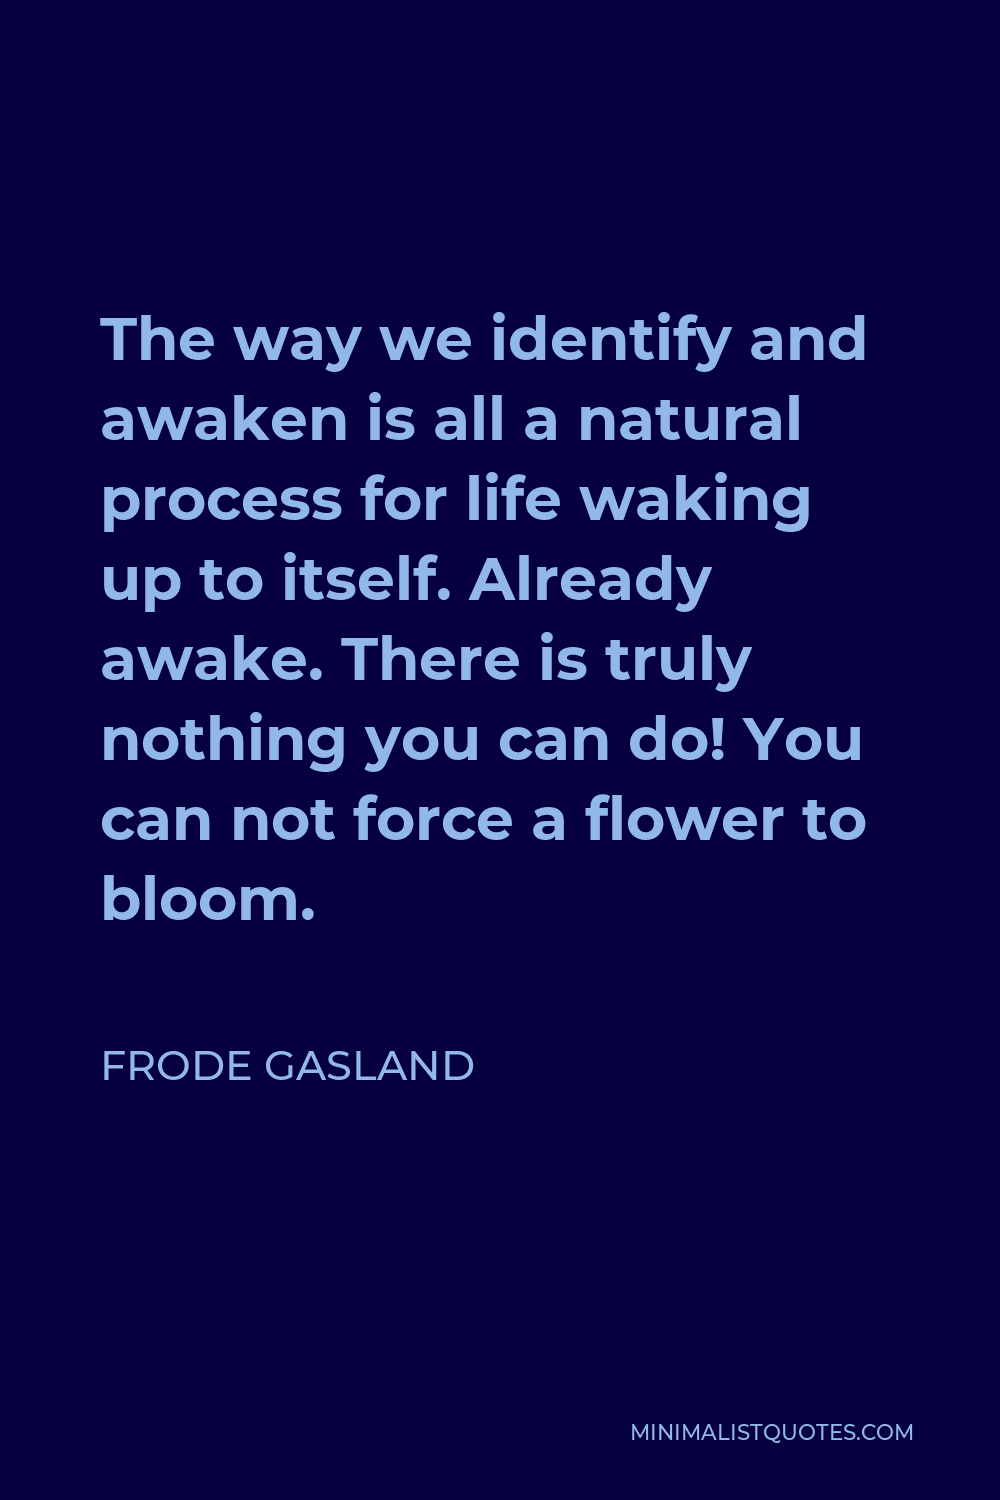 Frode Gasland Quote - The way we identify and awaken is all a natural process for life waking up to itself. Already awake. There is truly nothing you can do! You can not force a flower to bloom.